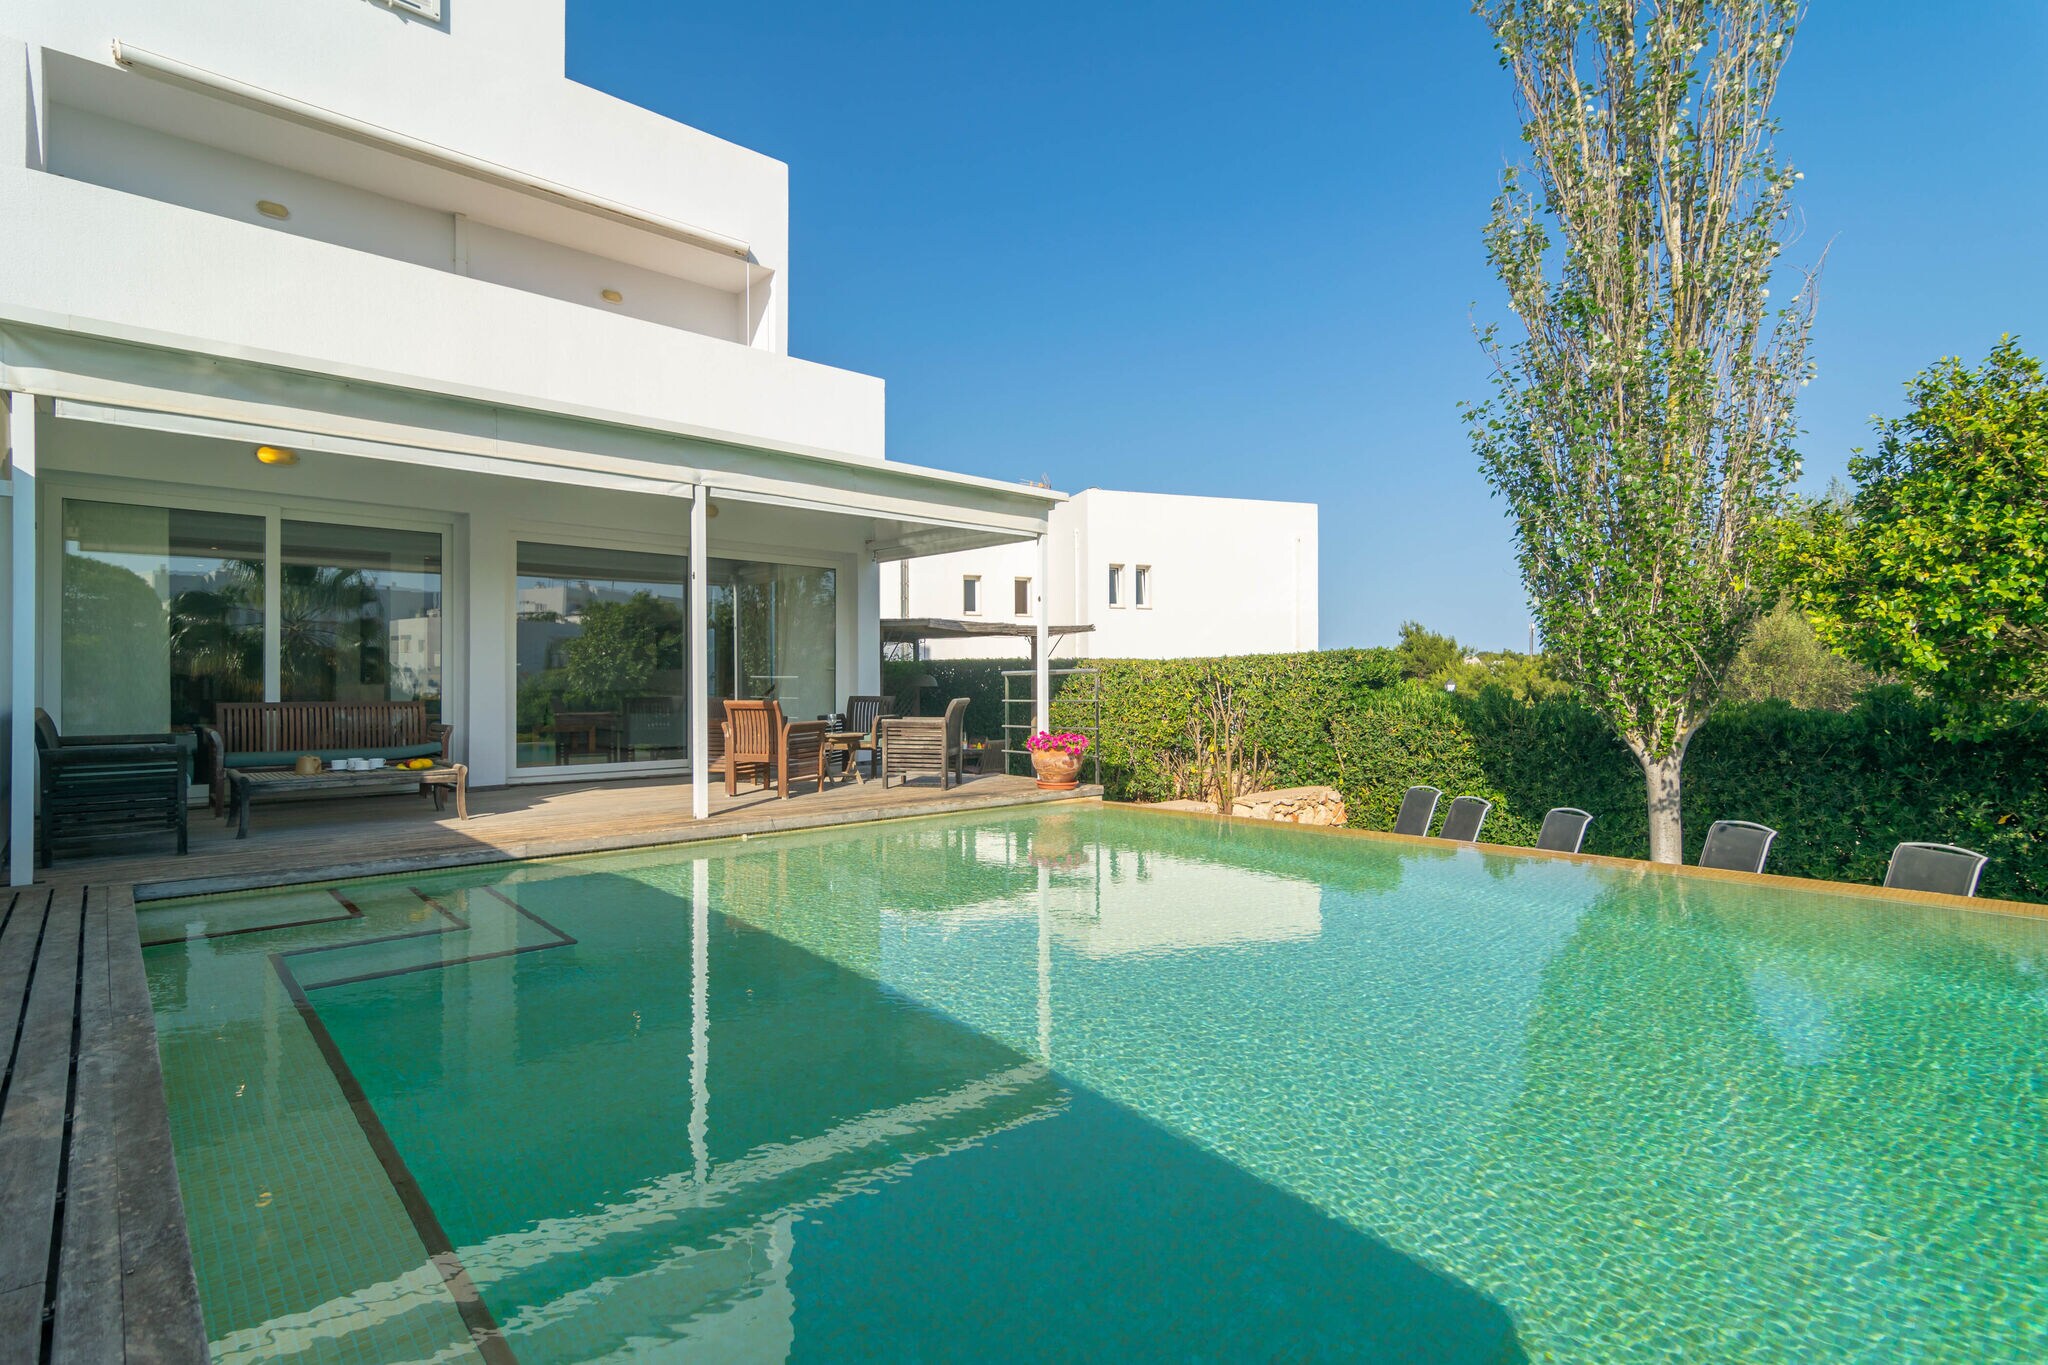 CASA CANYOT - Villa for 8 people in CALA D'OR.